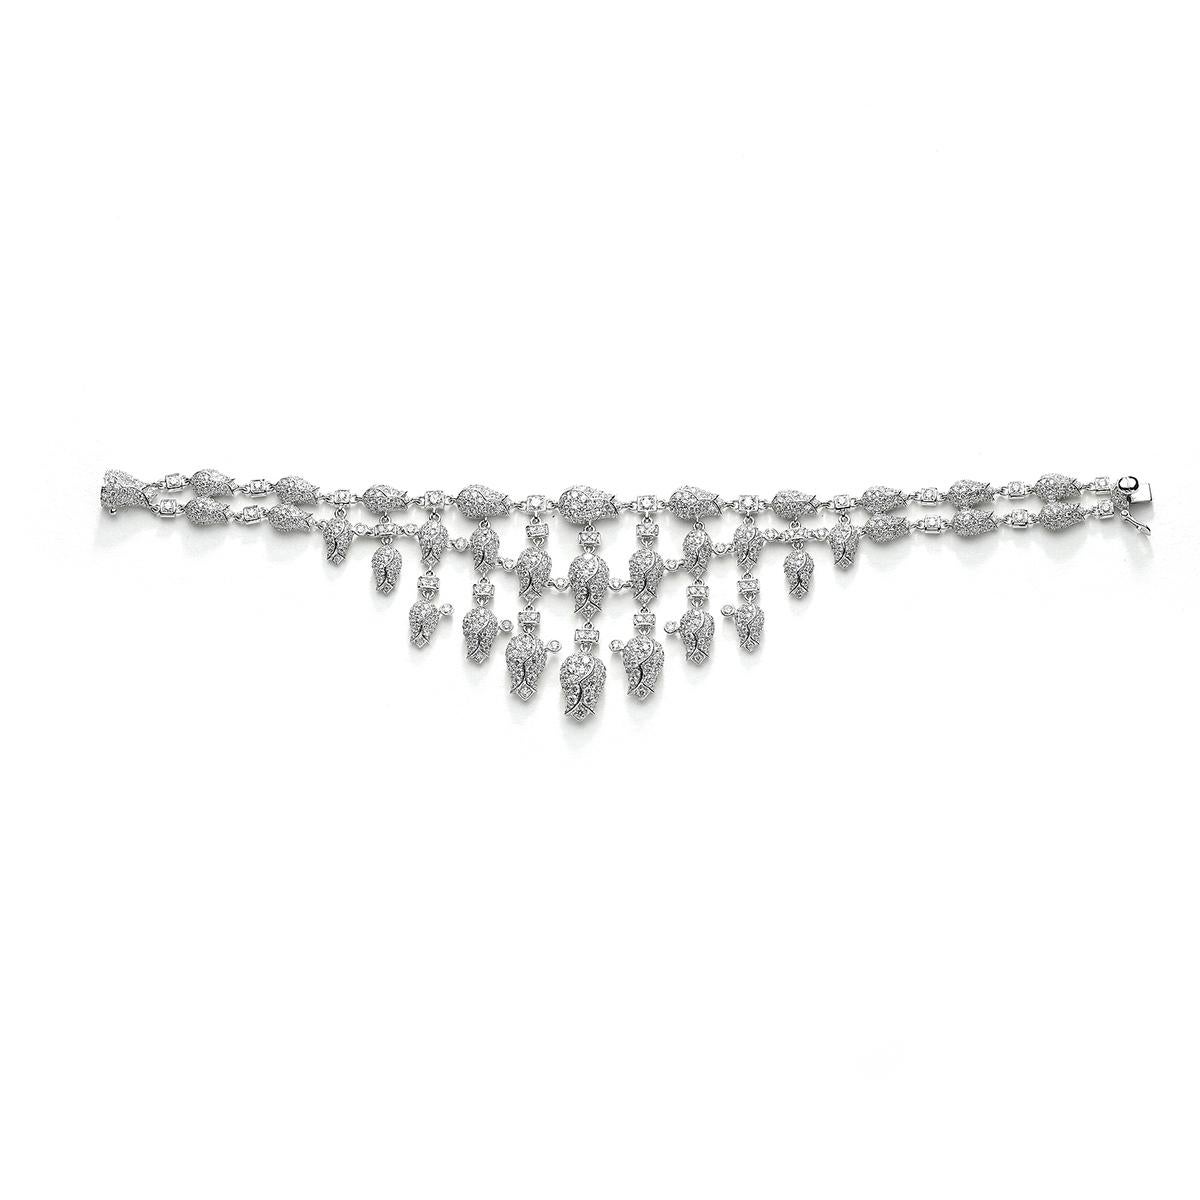 Bracelet in 18kt white gold set with 1298 diamonds 9.13 cts